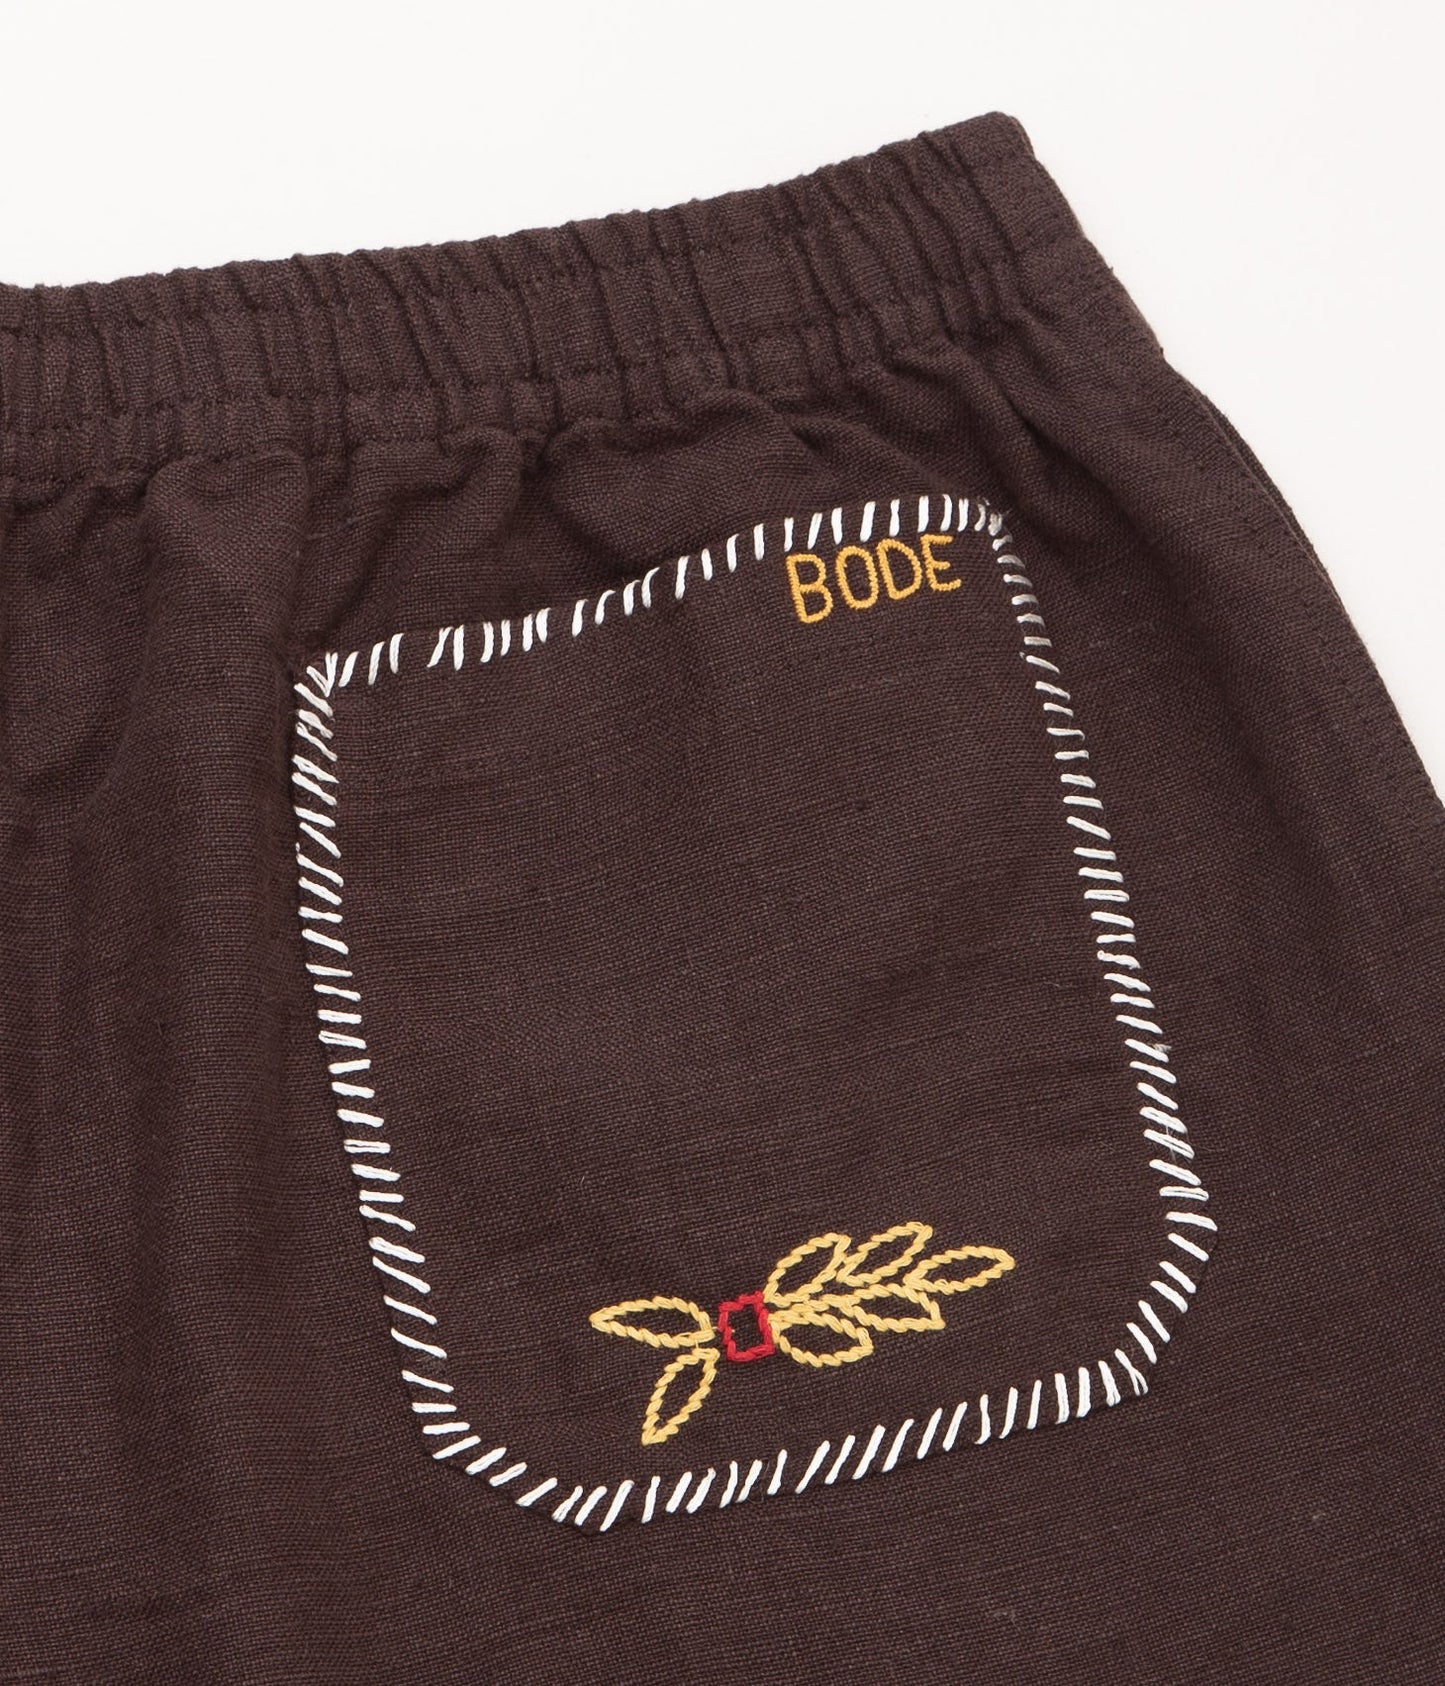 BODE "SHOW PONY SHORTS"(BROWN MULTI)